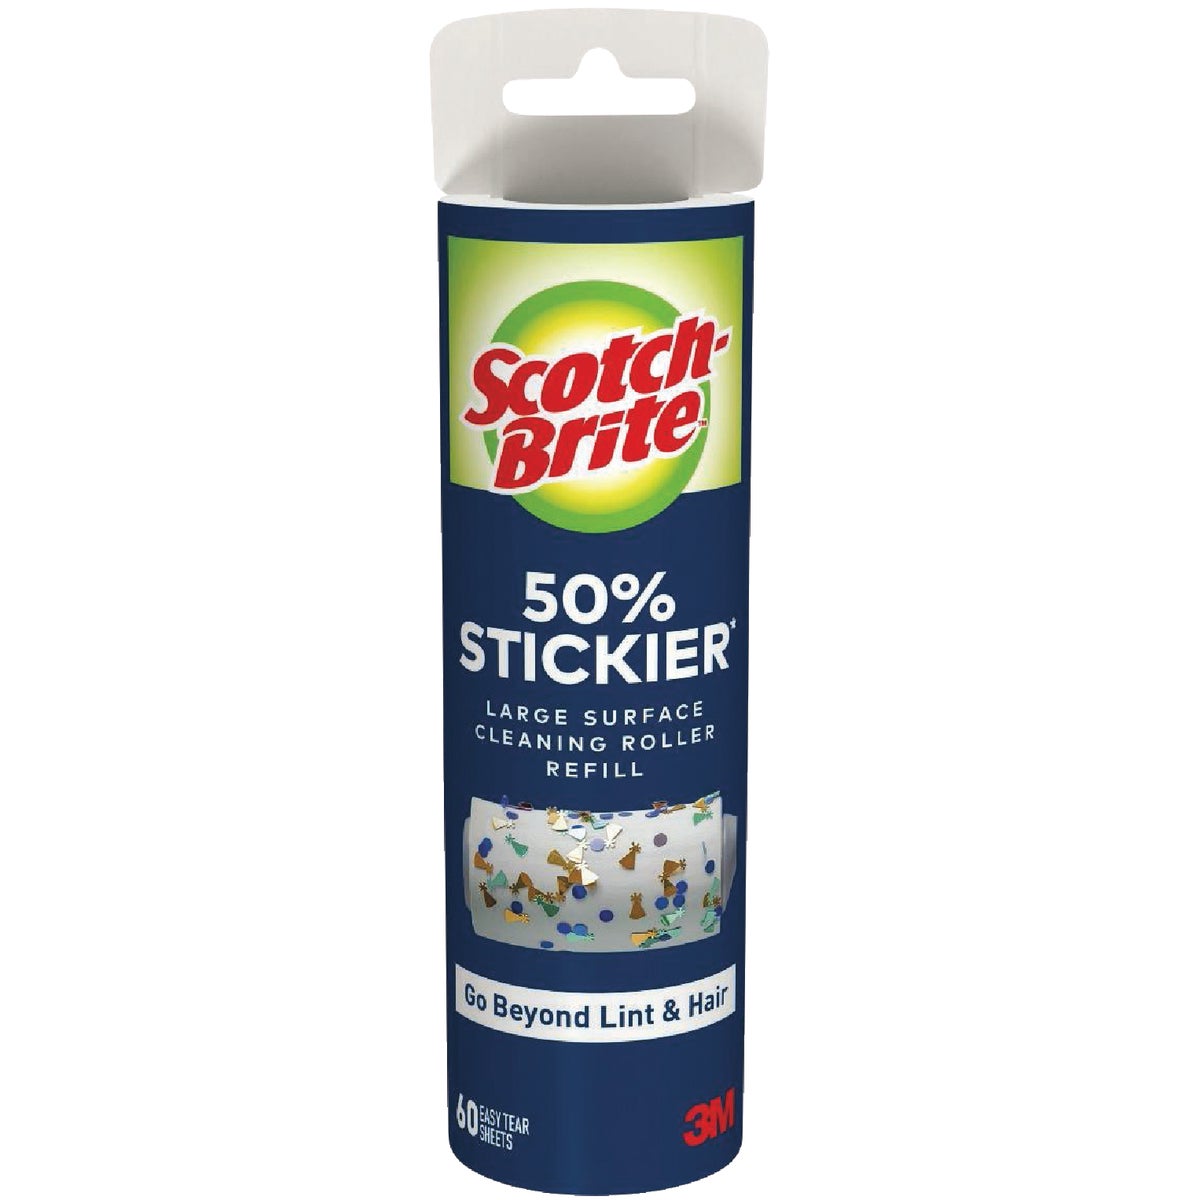 Scotch-Brite 50% Stickier Large Surface Lint Roller Refill (60-Count)